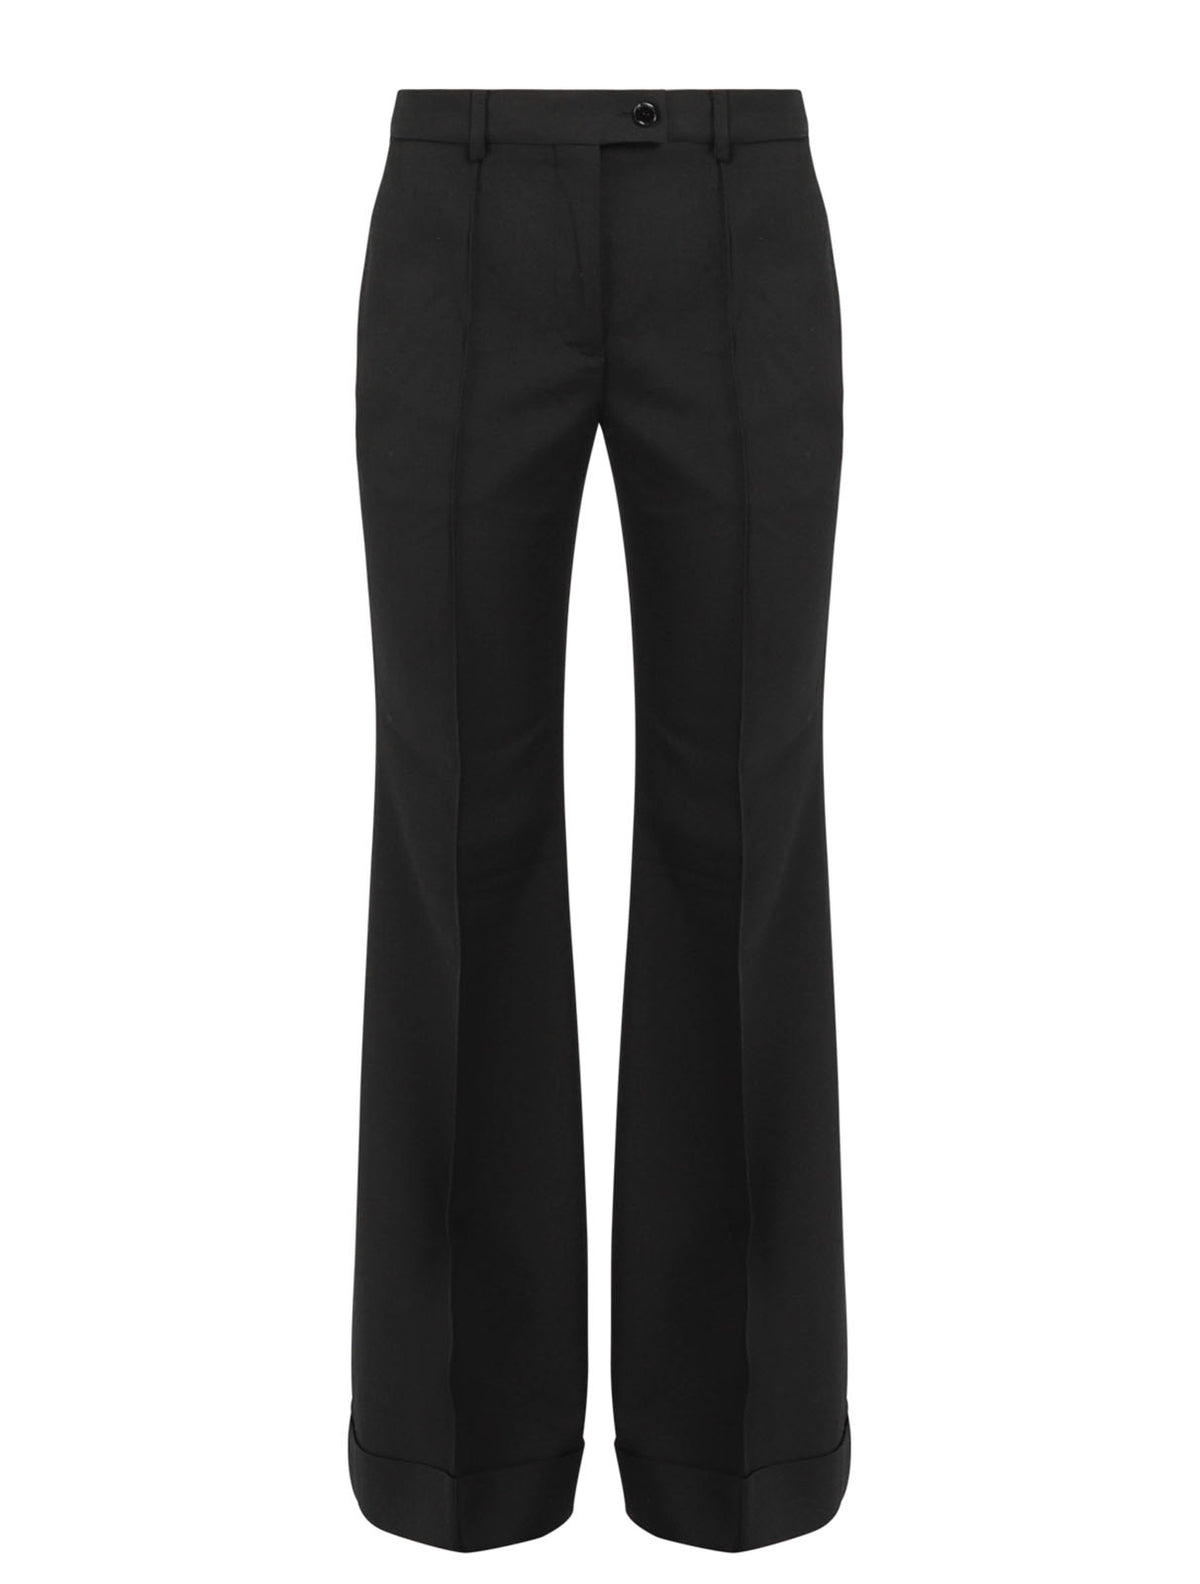 Women's Cotton Black High Waisted Flared Trousers | Boohoo UK